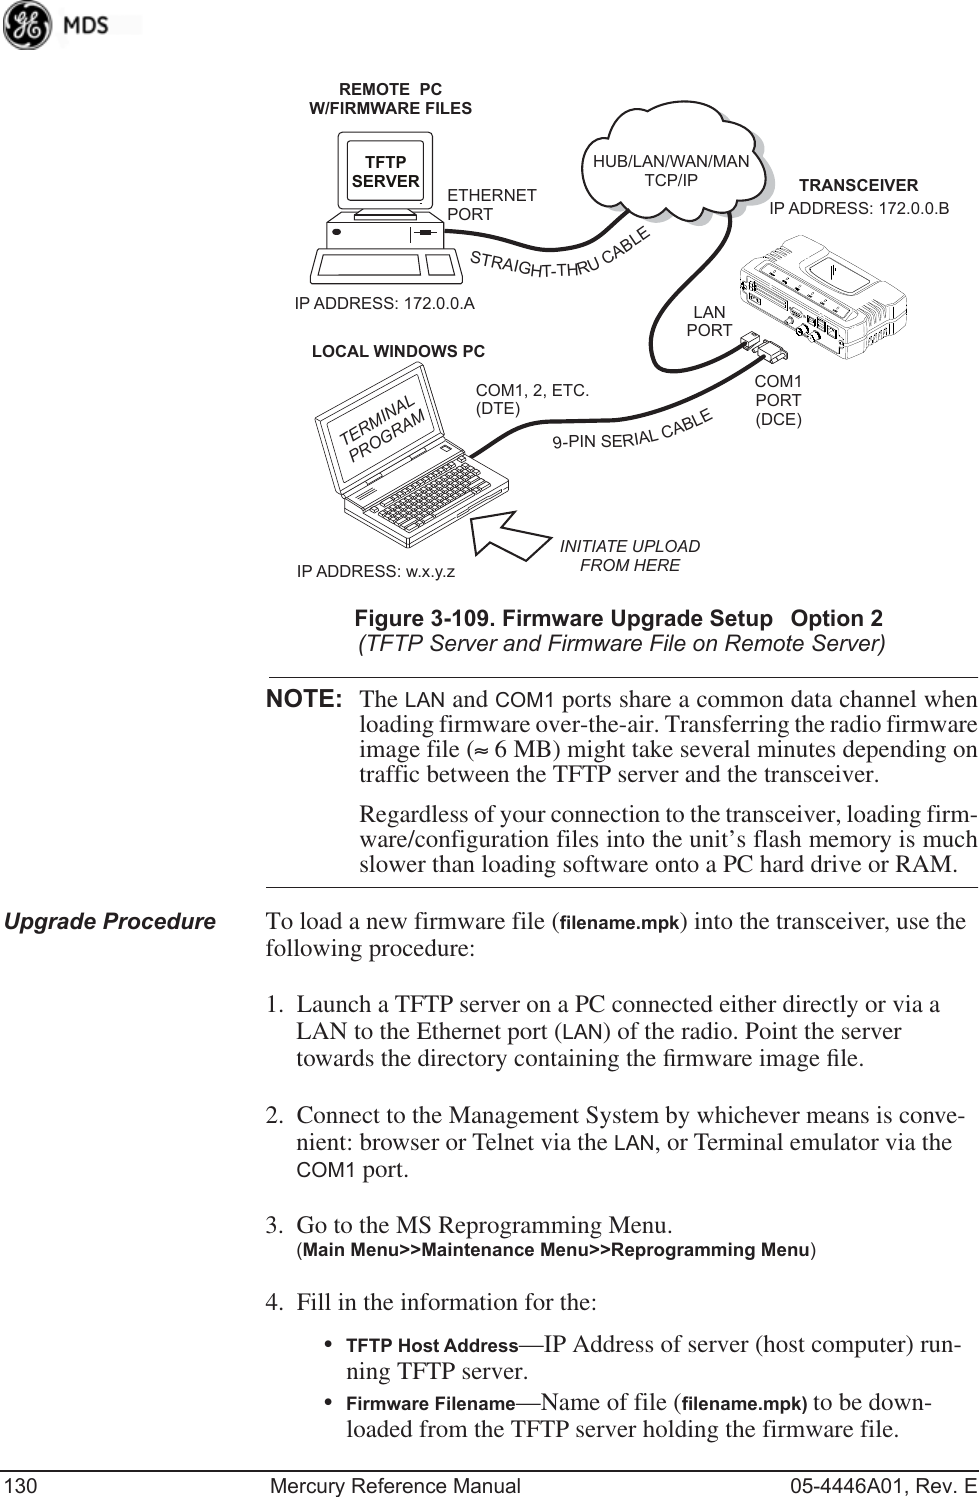 130 Mercury Reference Manual 05-4446A01, Rev. EInvisible place holderFigure 3-109. Firmware Upgrade SetupOption 2(TFTP Server and Firmware File on Remote Server)NOTE: The LAN and COM1 ports share a common data channel whenloading firmware over-the-air. Transferring the radio firmwareimage file (≈ 6 MB) might take several minutes depending ontraffic between the TFTP server and the transceiver. Regardless of your connection to the transceiver, loading firm-ware/configuration files into the unit’s flash memory is muchslower than loading software onto a PC hard drive or RAM.Upgrade Procedure To load a new firmware file (filename.mpk) into the transceiver, use the following procedure:1. Launch a TFTP server on a PC connected either directly or via a LAN to the Ethernet port (LAN) of the radio. Point the server towards the directory containing the ﬁrmware image ﬁle.2. Connect to the Management System by whichever means is conve-nient: browser or Telnet via the LAN, or Terminal emulator via the COM1 port.3. Go to the MS Reprogramming Menu. (Main Menu&gt;&gt;Maintenance Menu&gt;&gt;Reprogramming Menu)4. Fill in the information for the:•TFTP Host Address—IP Address of server (host computer) run-ning TFTP server.•Firmware Filename—Name of file (filename.mpk) to be down-loaded from the TFTP server holding the firmware file.TRANSCEIVERIP ADDRESS: 172.0.0.BTFTPSERVER ETHERNETPORTCOM1PORT(DCE)INITIATE UPLOADFROM HEREREMOTE  PCW/FIRMWARE FILESHUB/LAN/WAN/MANTCP/IPLANPORTCOM1, 2, ETC.(DTE)IP ADDRESS: 172.0.0.ALOCAL WINDOWS PCIP ADDRESS: w.x.y.zTERMINALPROGRAM9-PINSERIALCABLESTRAIGHT-THRUCABLE